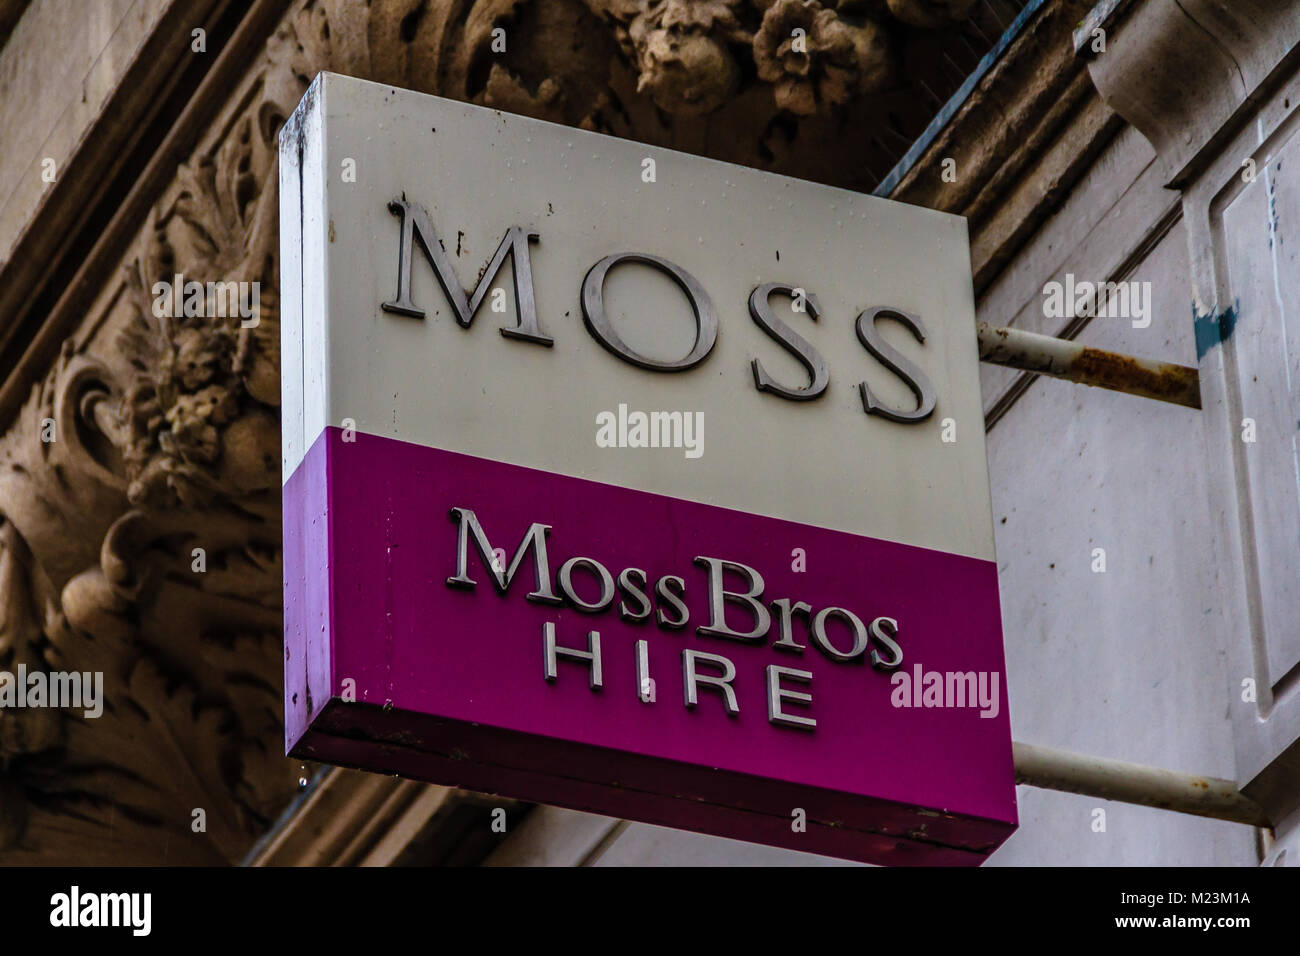 Moss Bros suit hire shop sign on Cornmarket Street, Oxford, Oxfordshire, UK. Feb 2018 Stock Photo